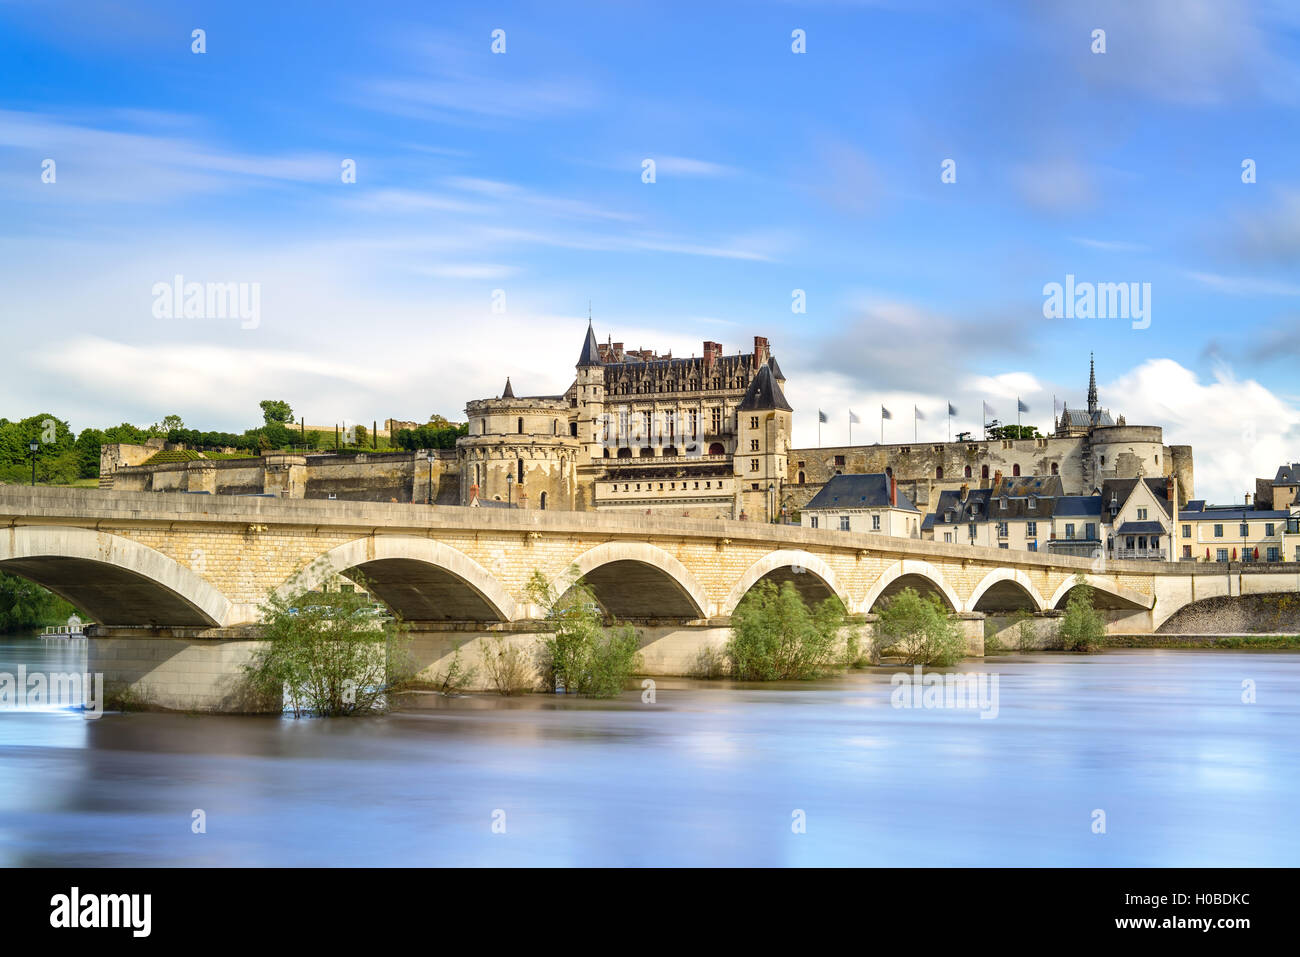 Amboise medieval castle or chateau and bridge on Loire river. France, Europe. Unesco site. Stock Photo